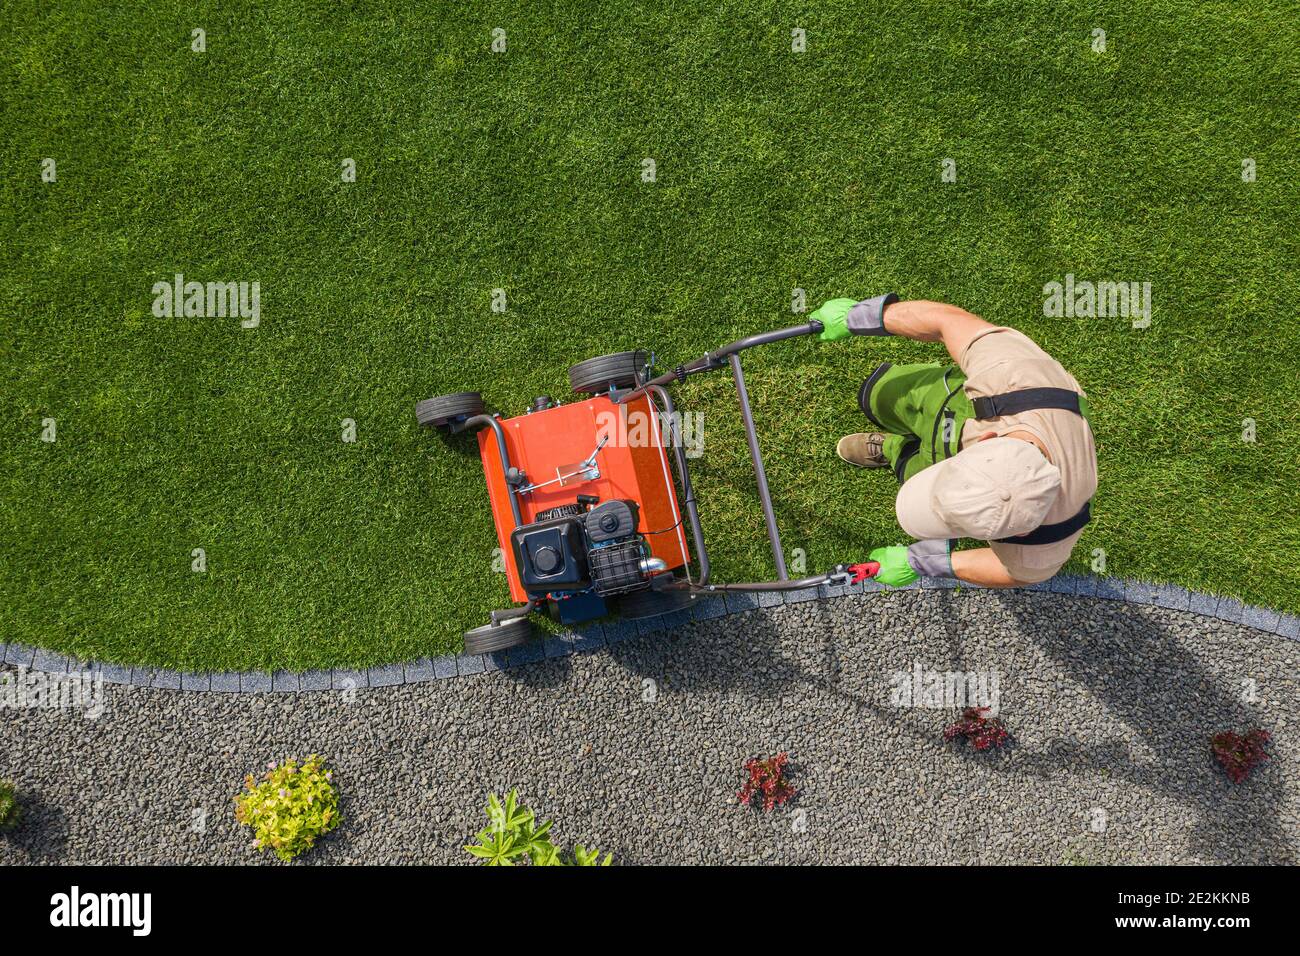 Backyard Garden Lawn Aeration Job Aerial View For Controlling Lawn Thatch and Soil Compaction. Gardening and Landscaping Industry Theme. Stock Photo